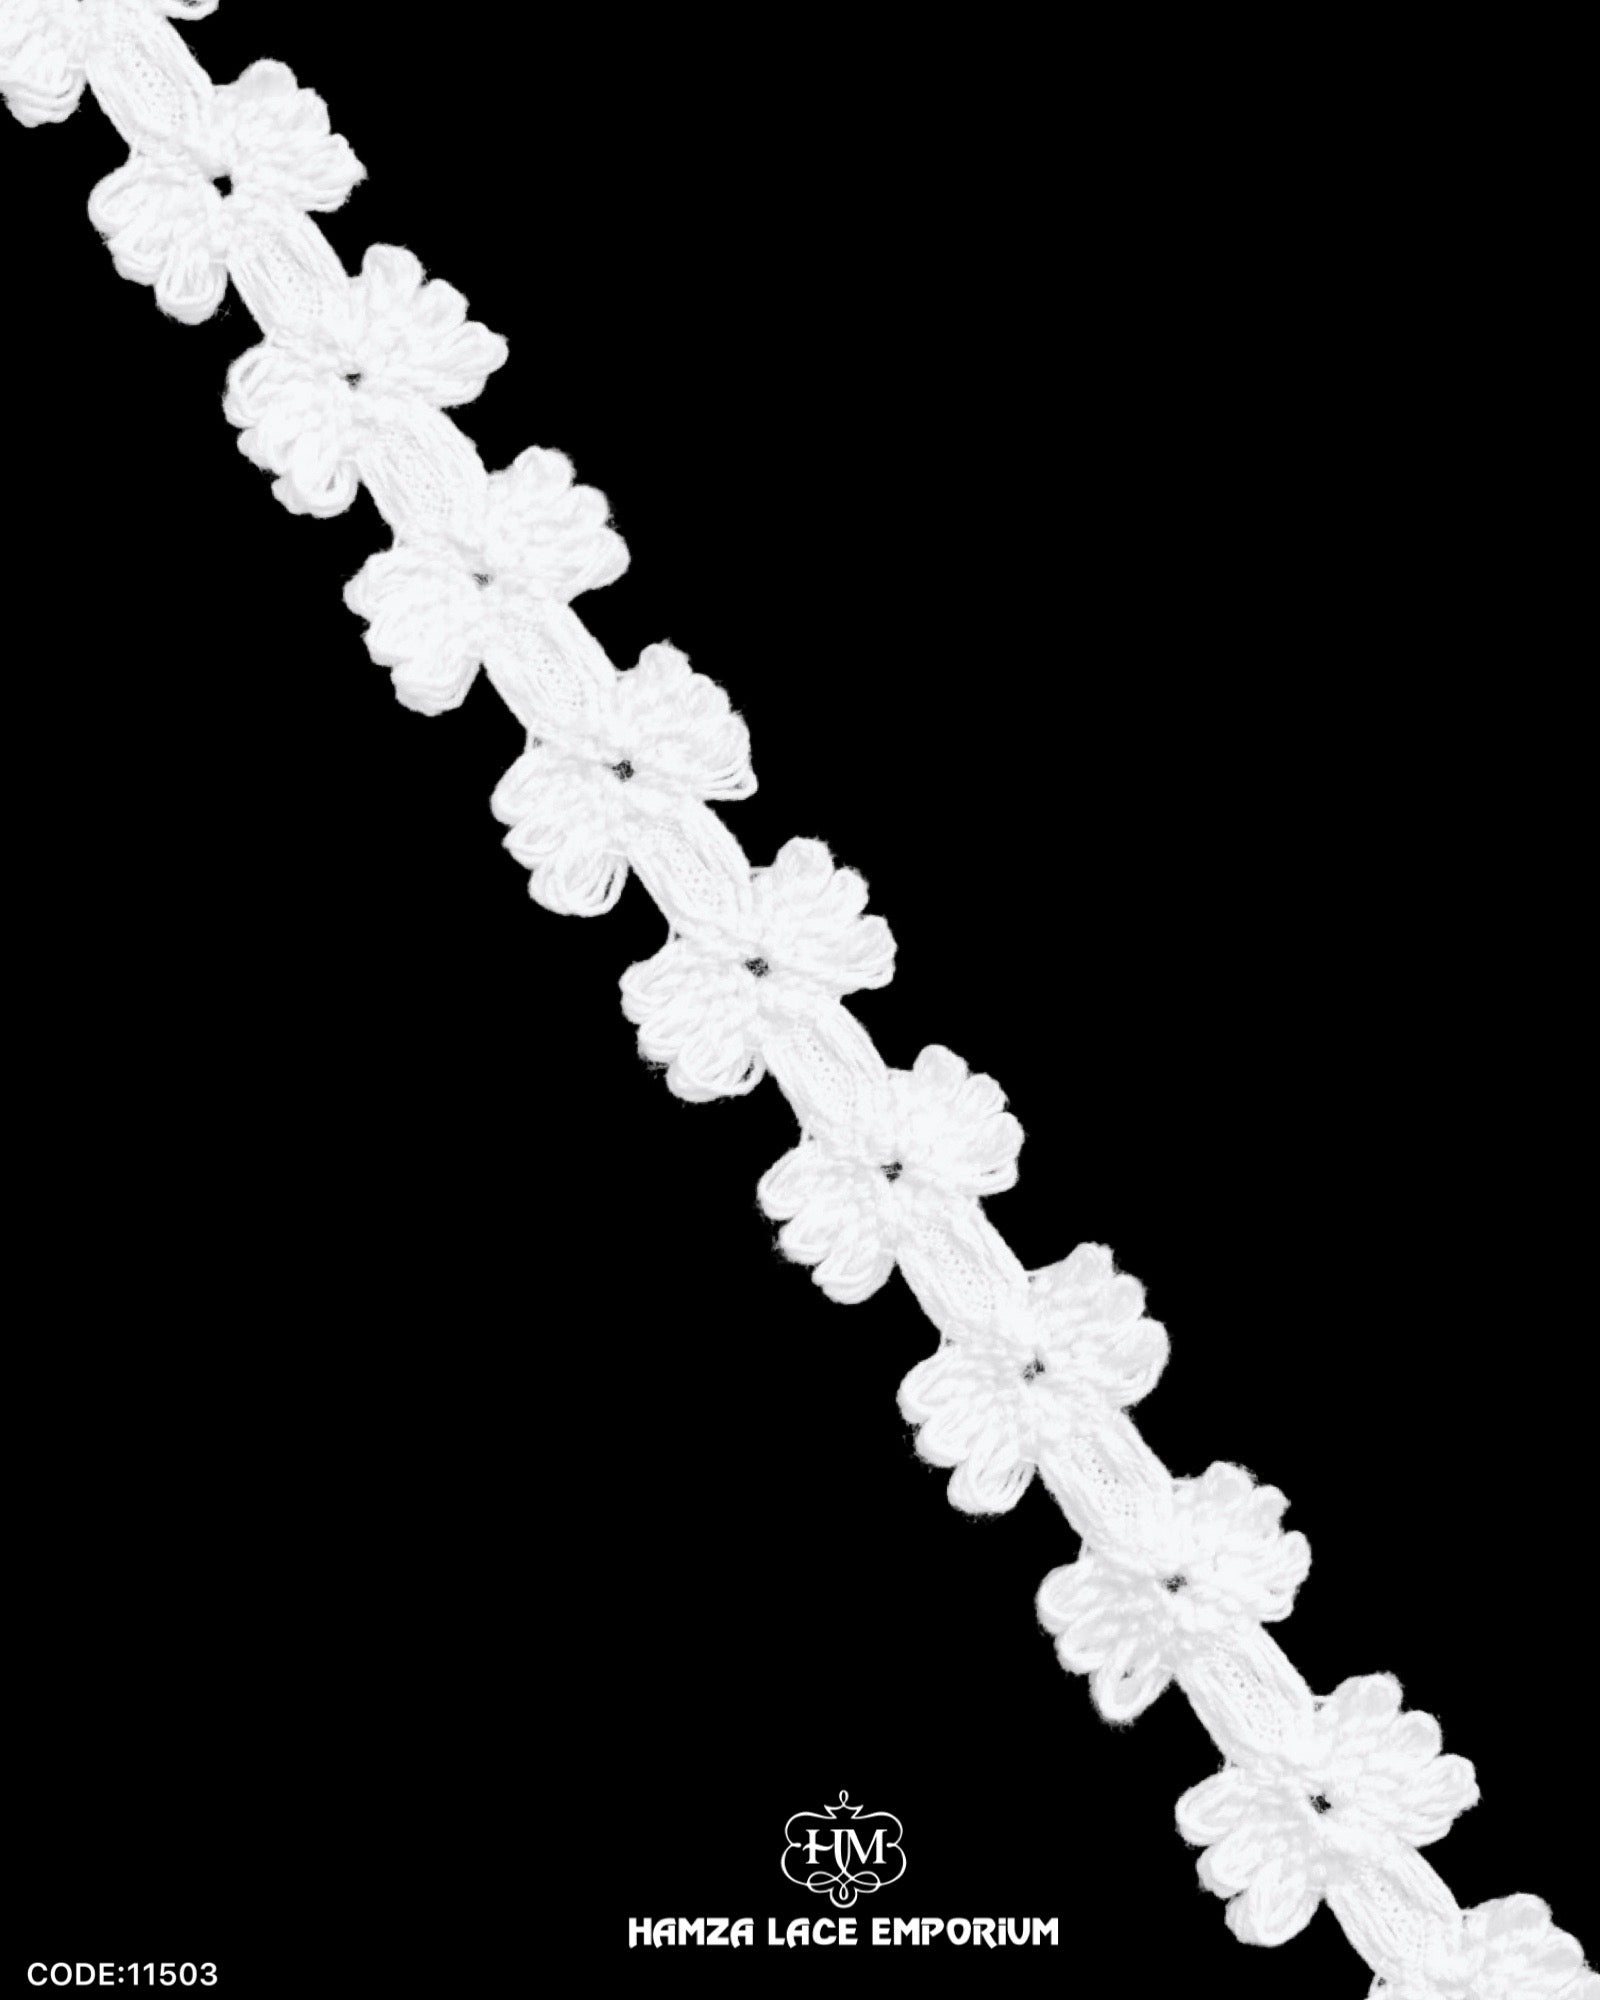 'Center Filling Crochet Lace 11503' with the brand name 'Hamza Lace' written at the bottom